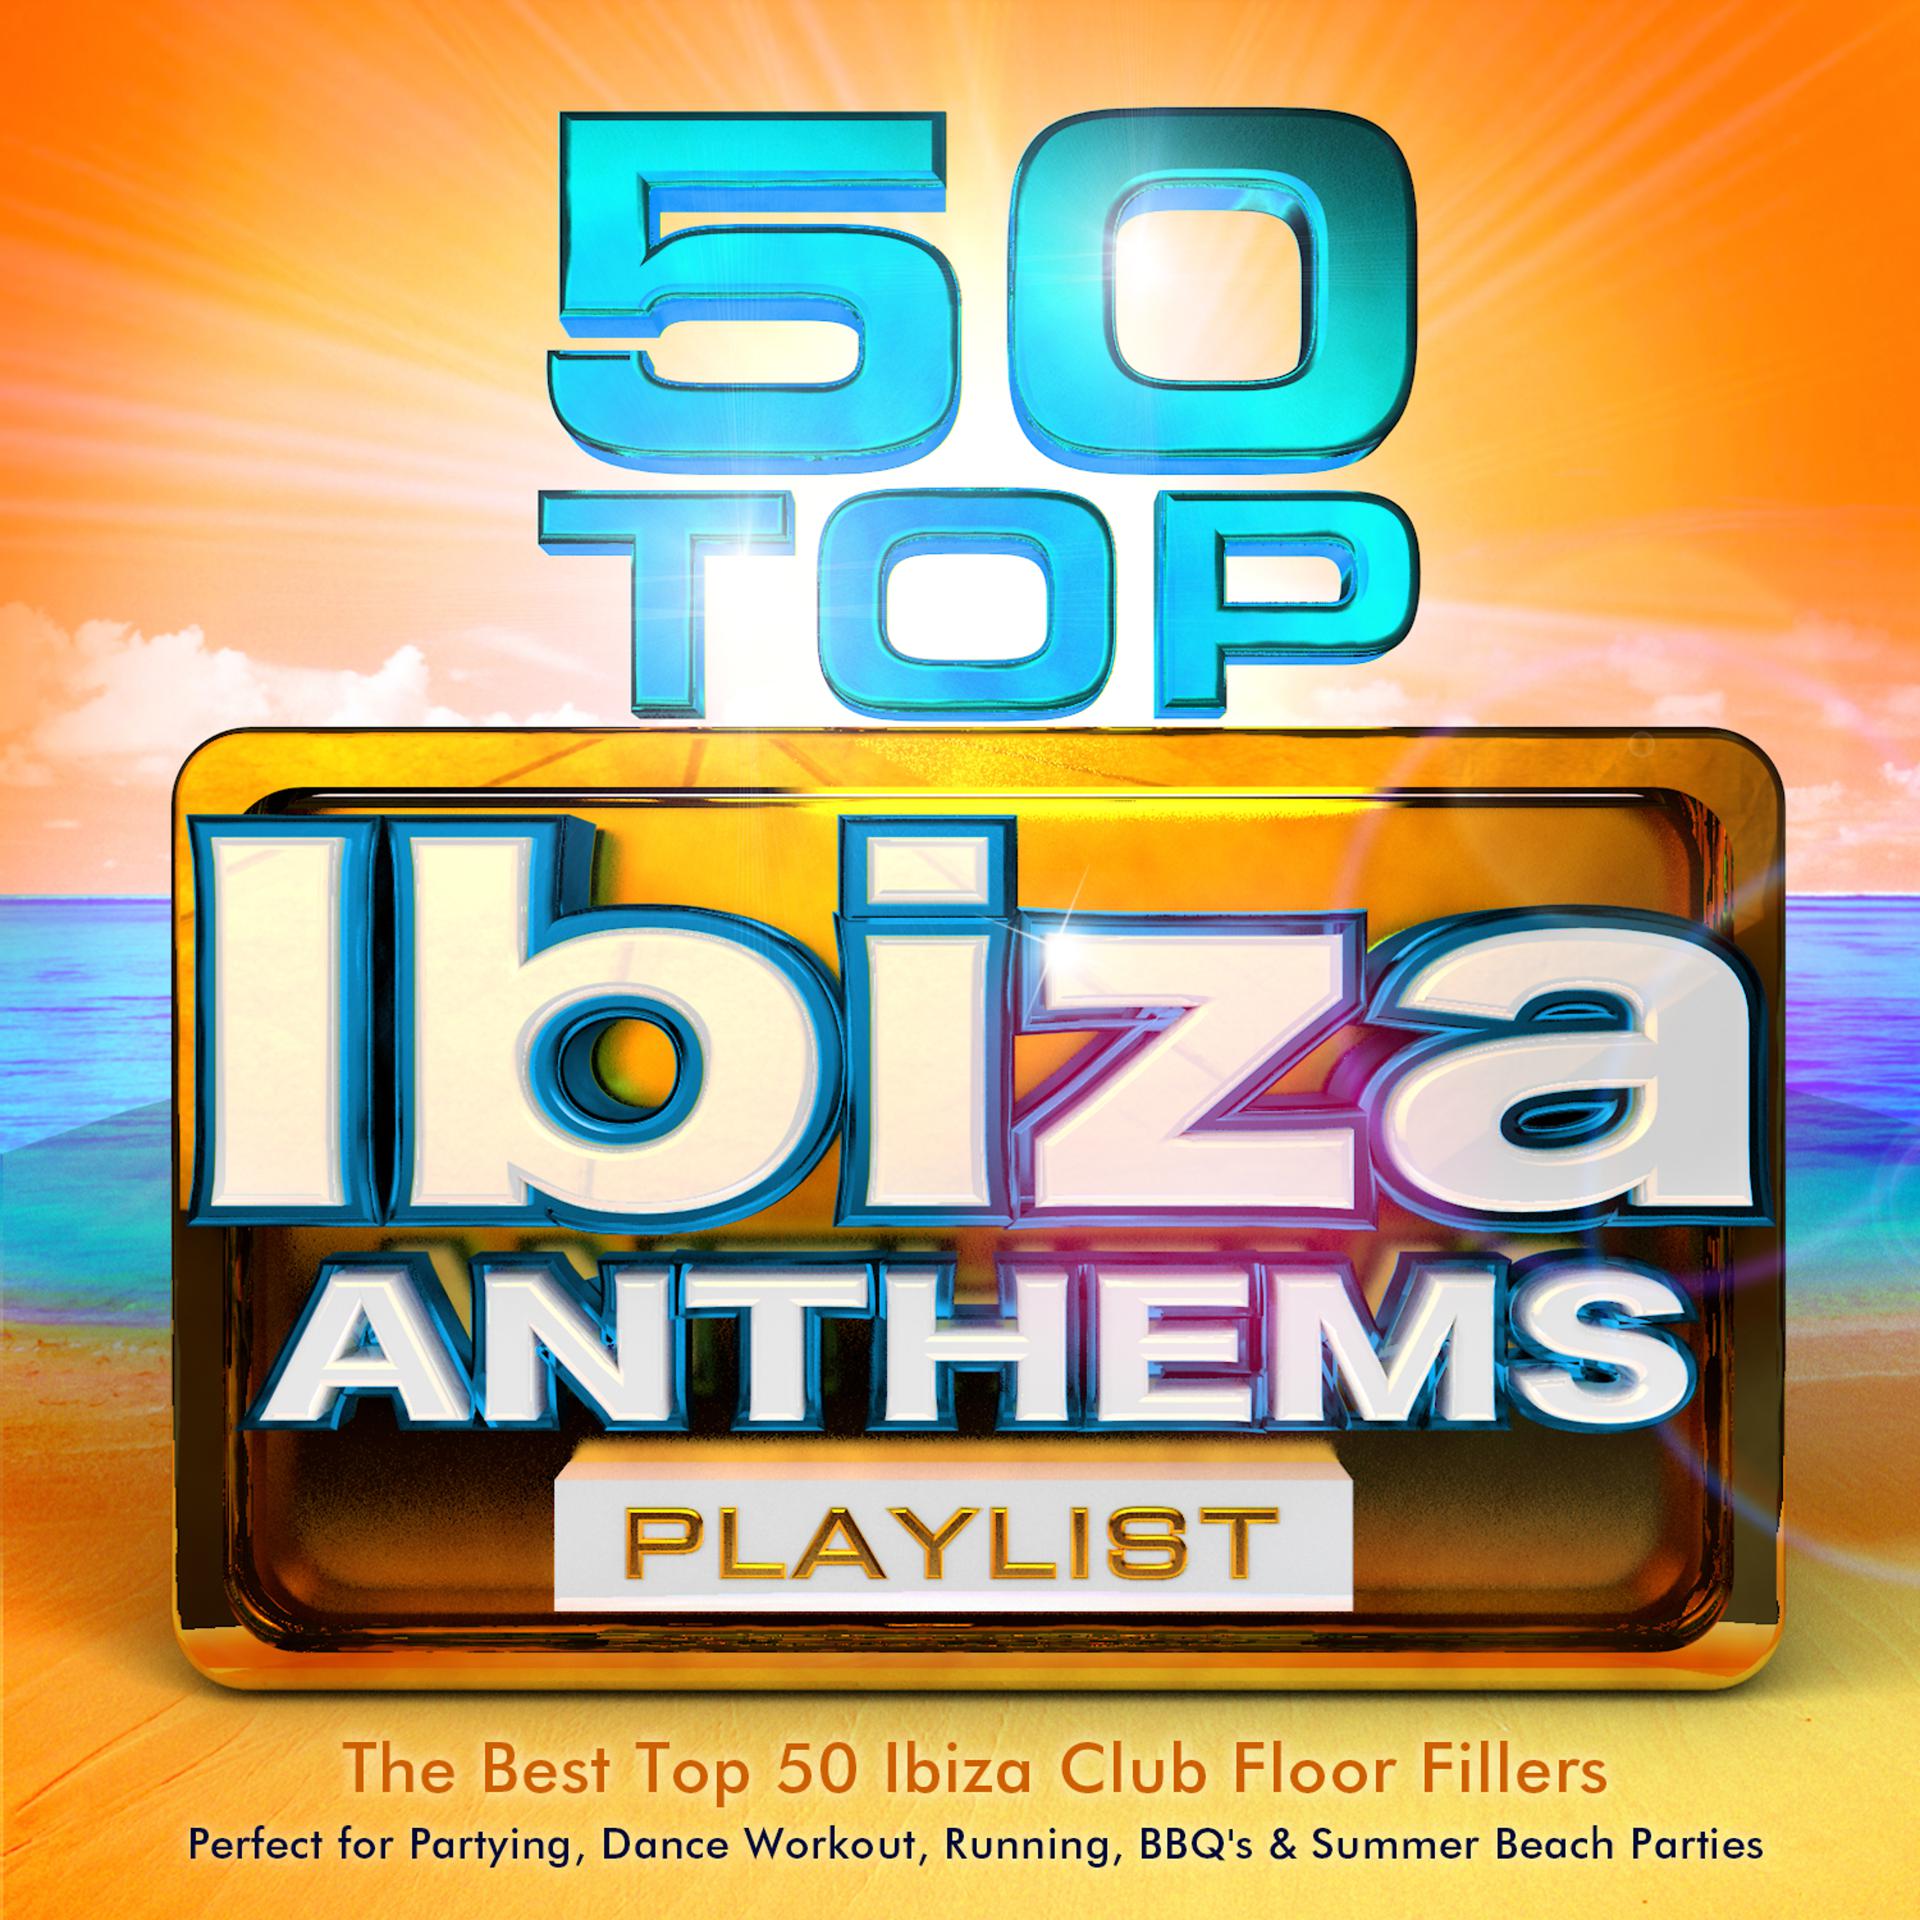 Постер альбома 50 Top Ibiza Anthems Playlist - The Best Top 50 Ibiza Club Floor Fillers - Perfect for Partying, Dance Workout, Running, Bbq's & Summer Beach Parties